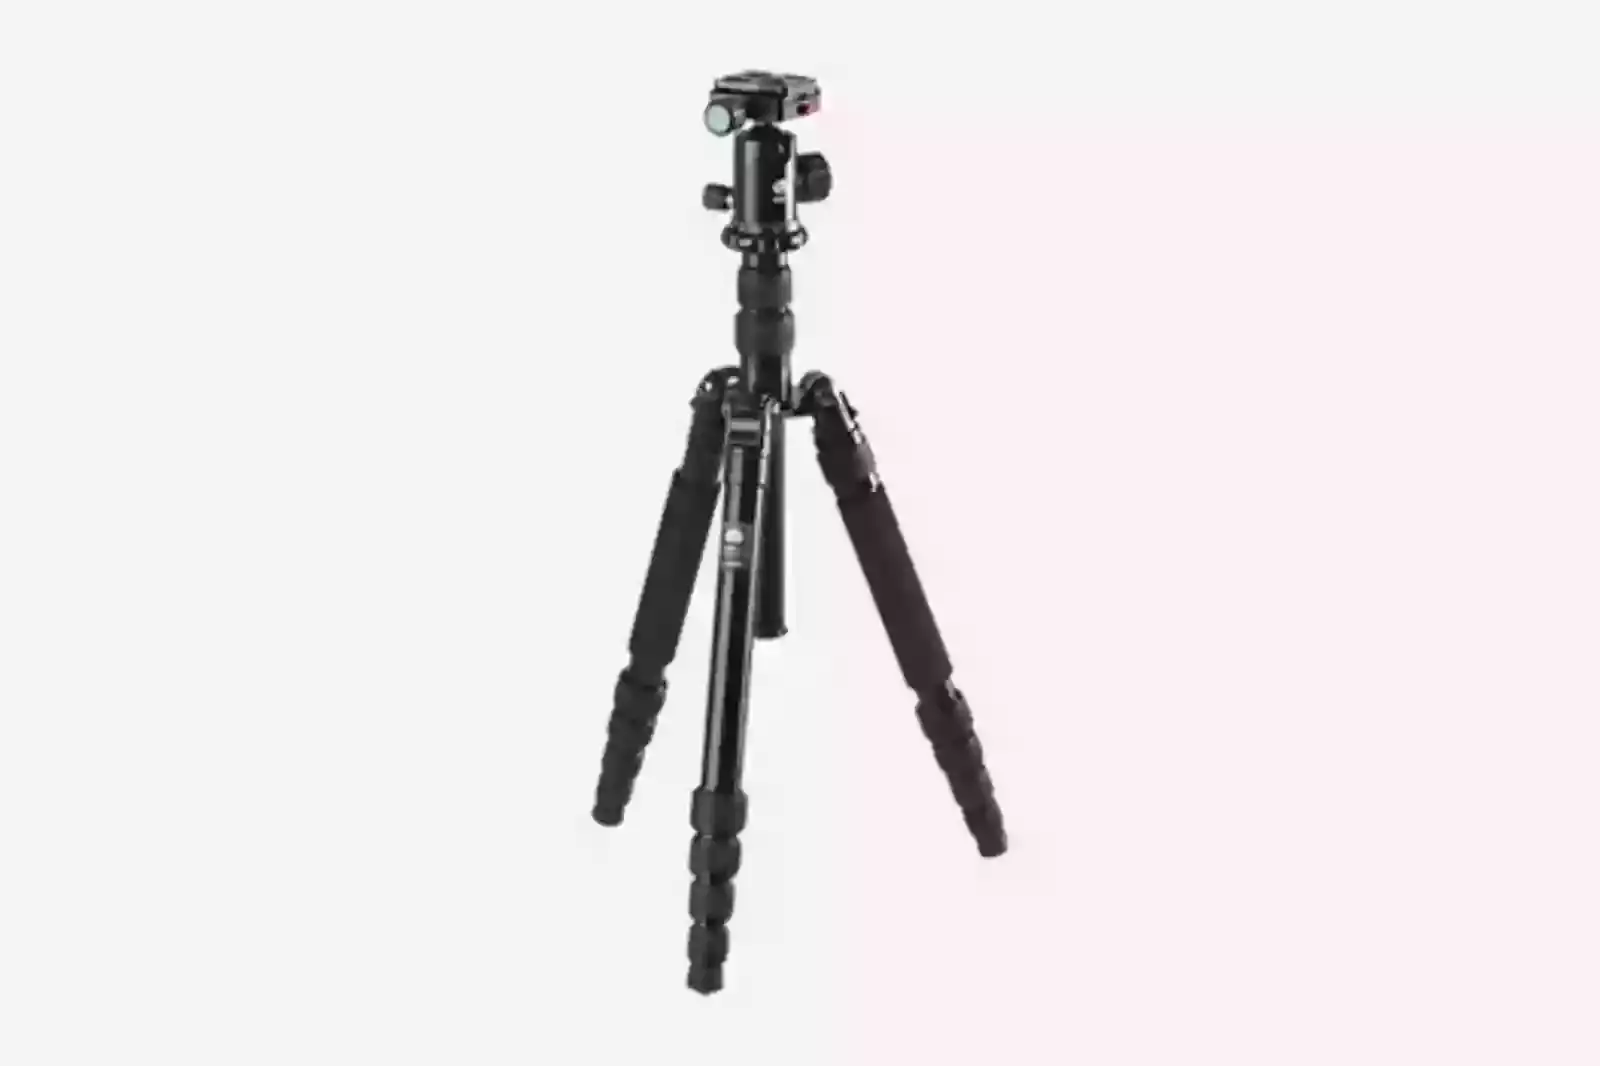 7. Make use of a tripod or stable surface